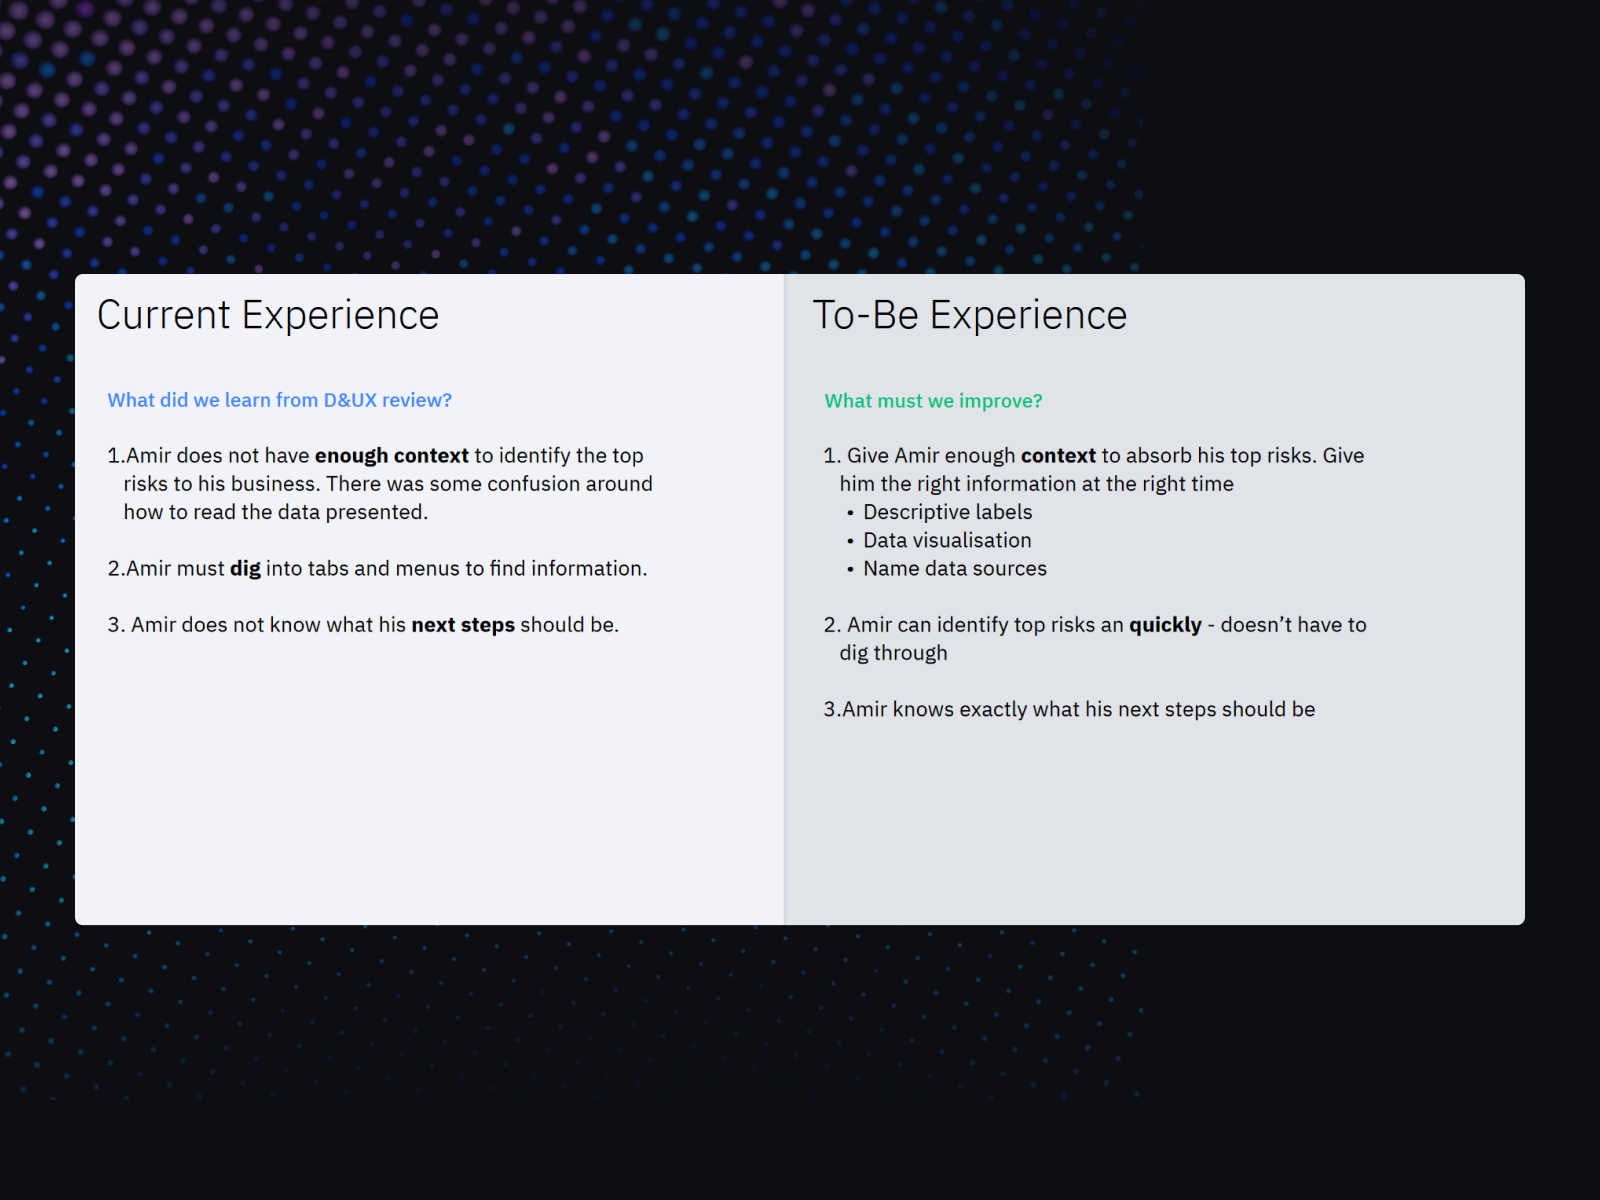 Shown is current experience outline and a new proposed experience outline